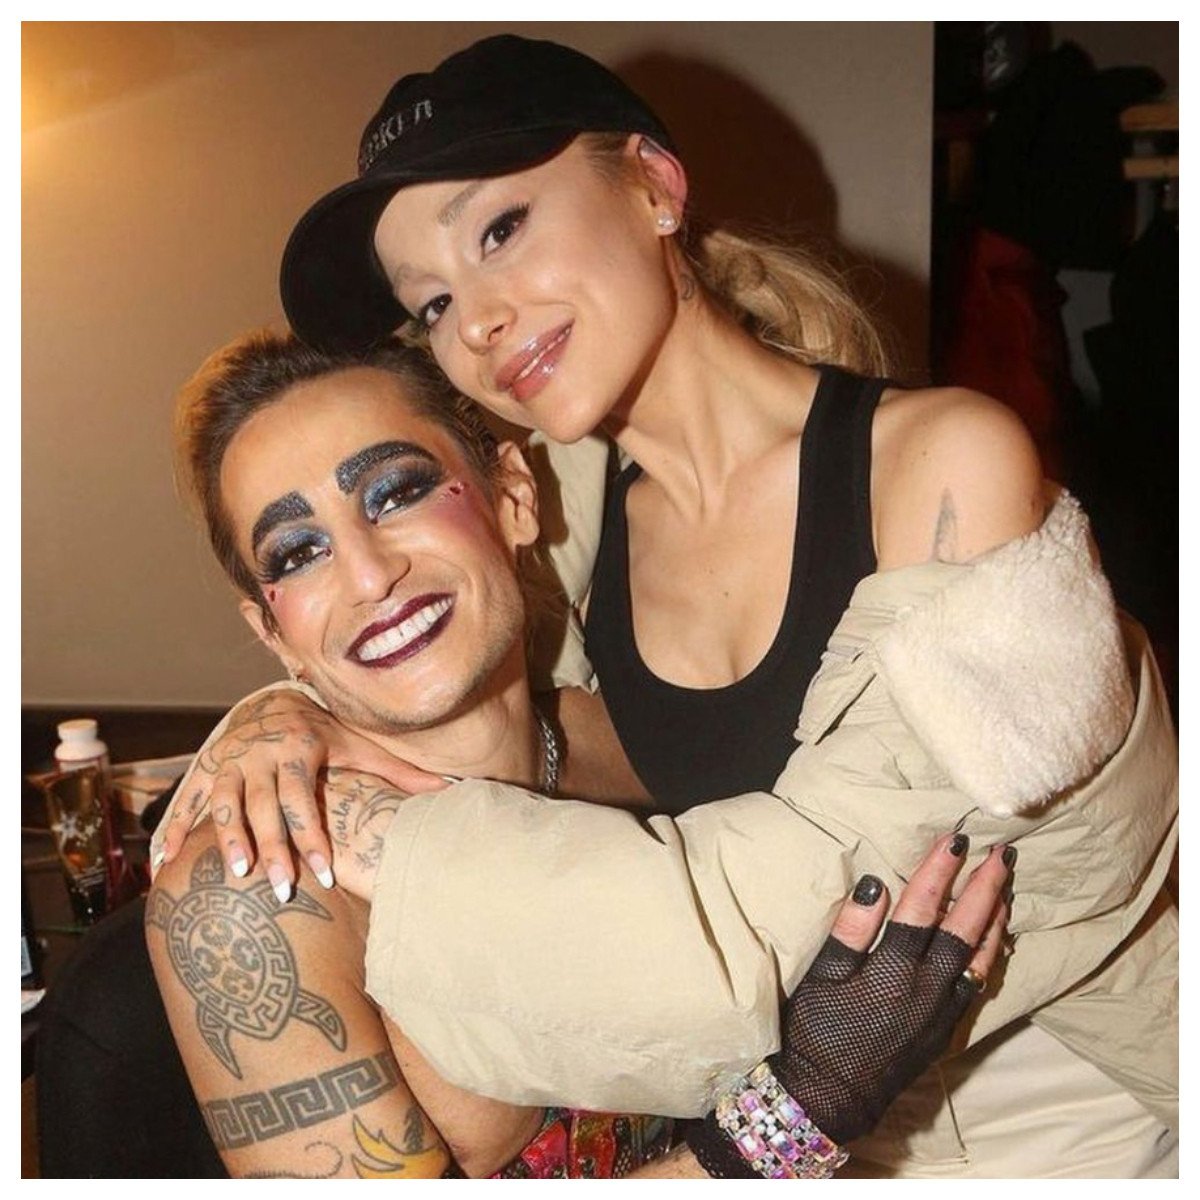 Siblings Ariana and Frankie Grande are both successful performers and “best friends” despite their 10-year age gap. Photo: @ariana_grande7999/Instagram